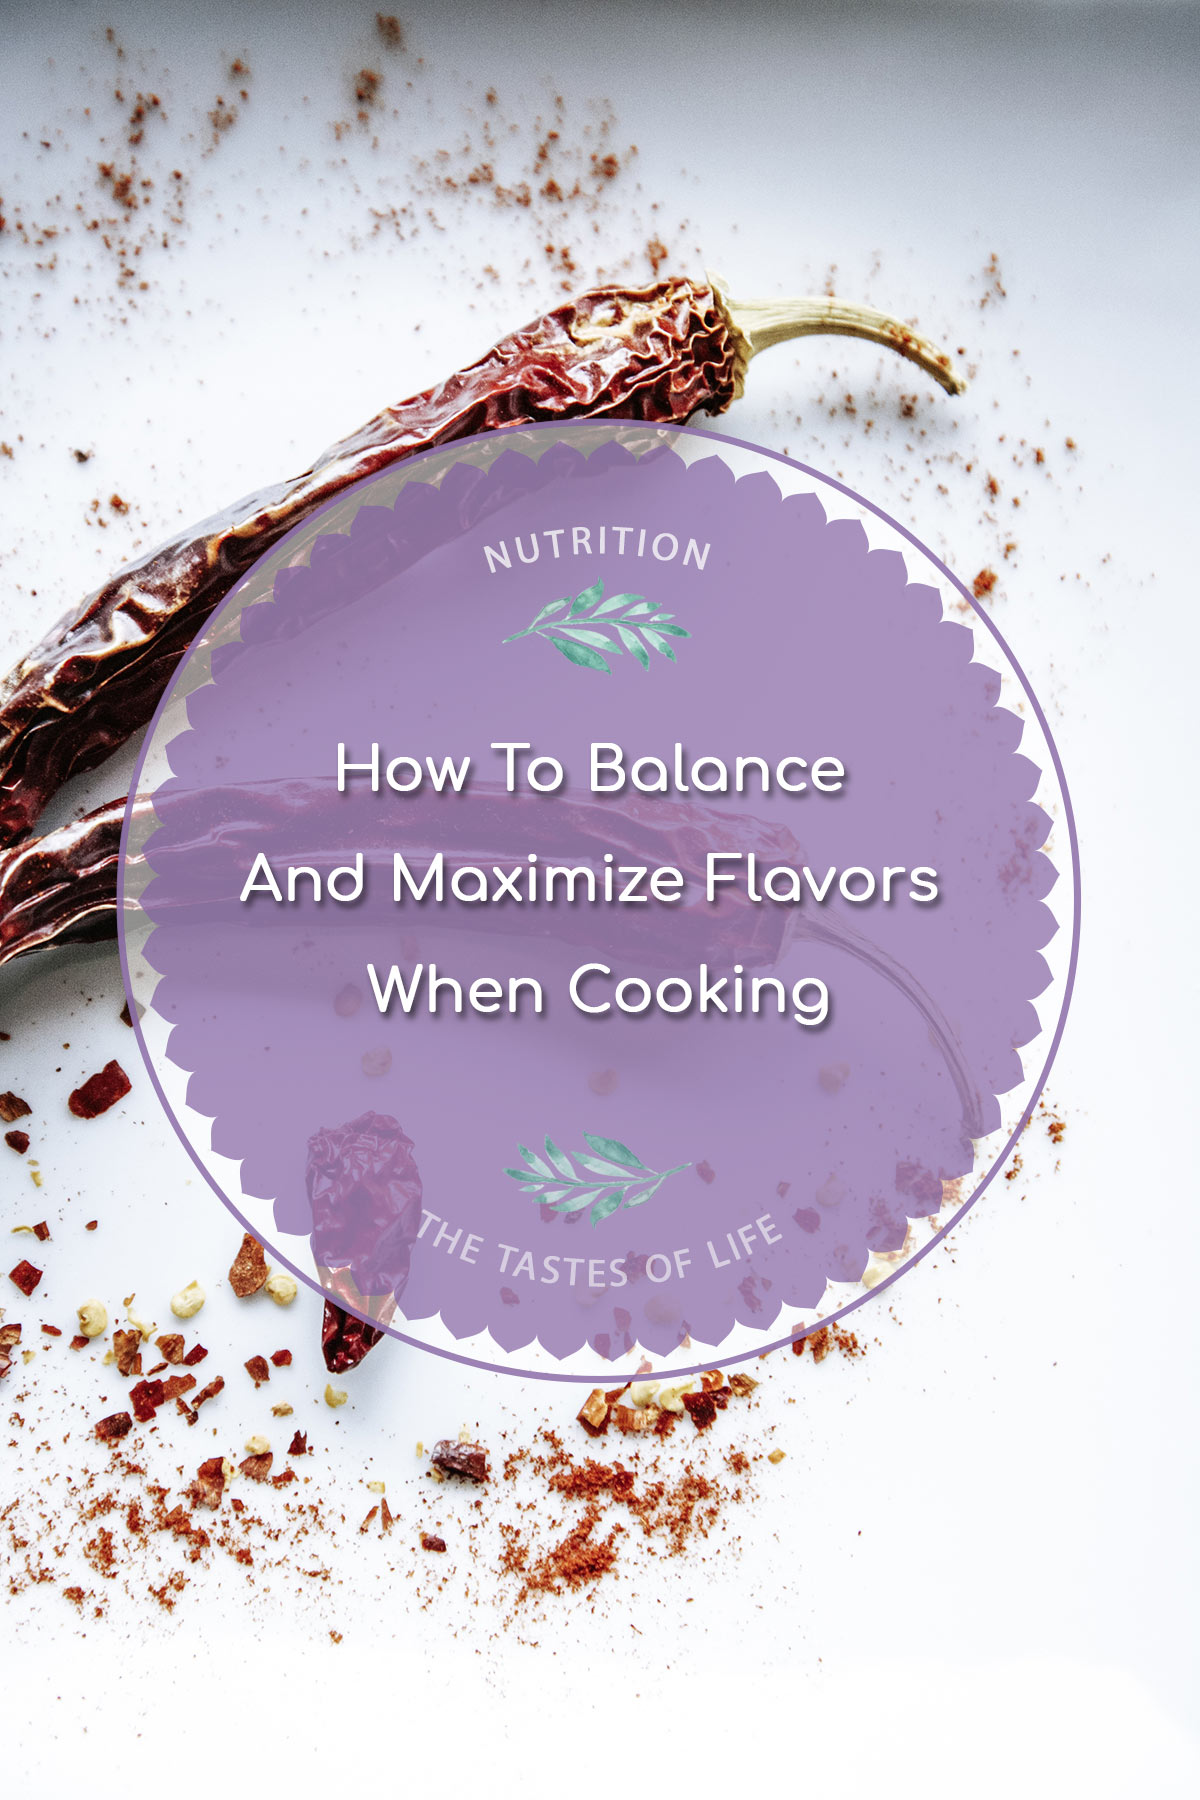 How to Balance and Maximize Flavors When Cooking